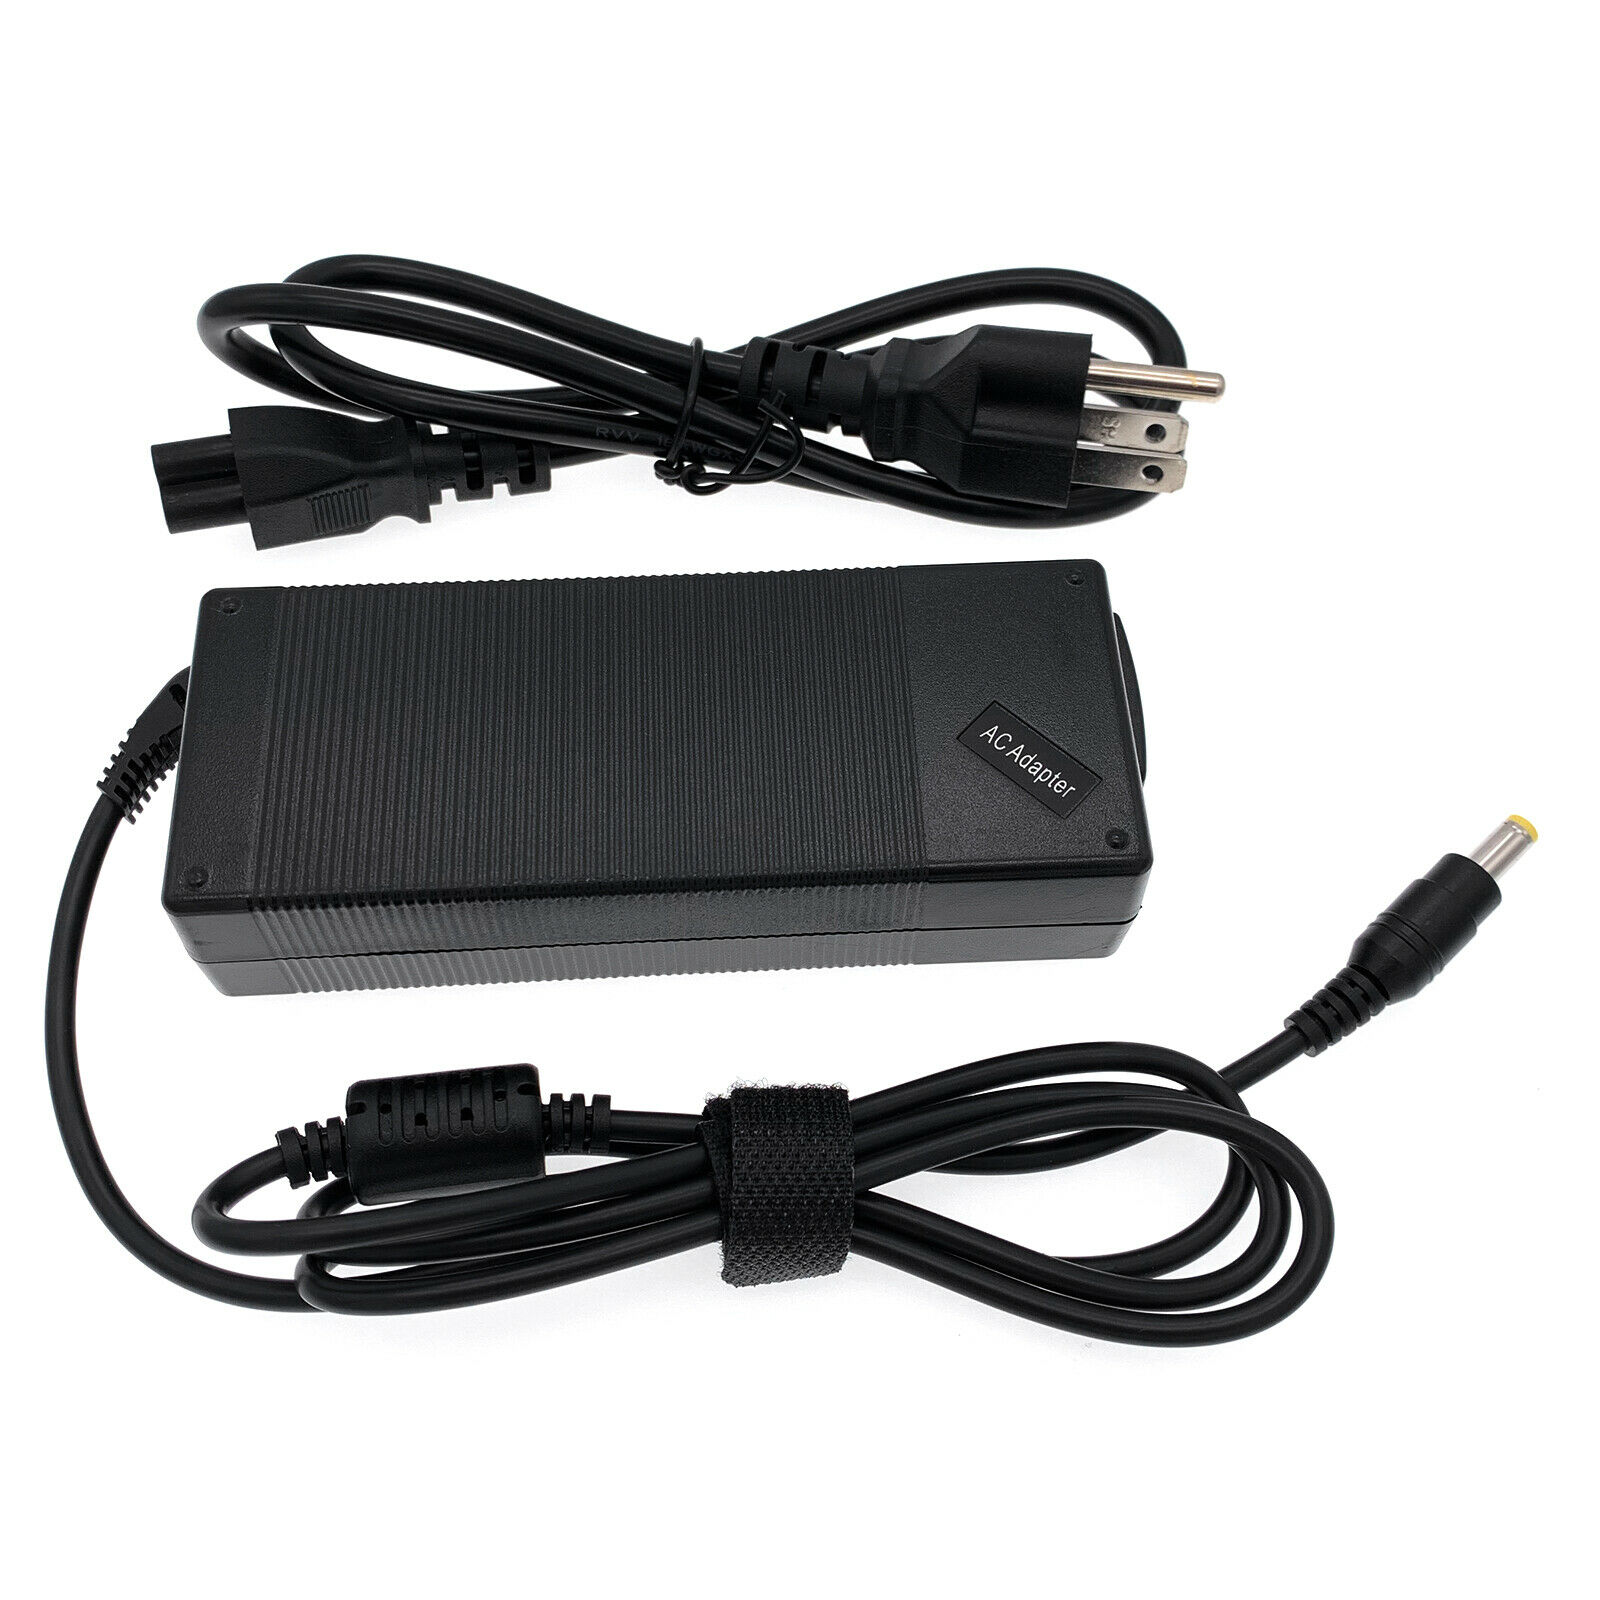 AC Adapter For Panasonic ToughBook CF-30 CF-73 ac Battery Charger Power Supply with Cord Brand: Un